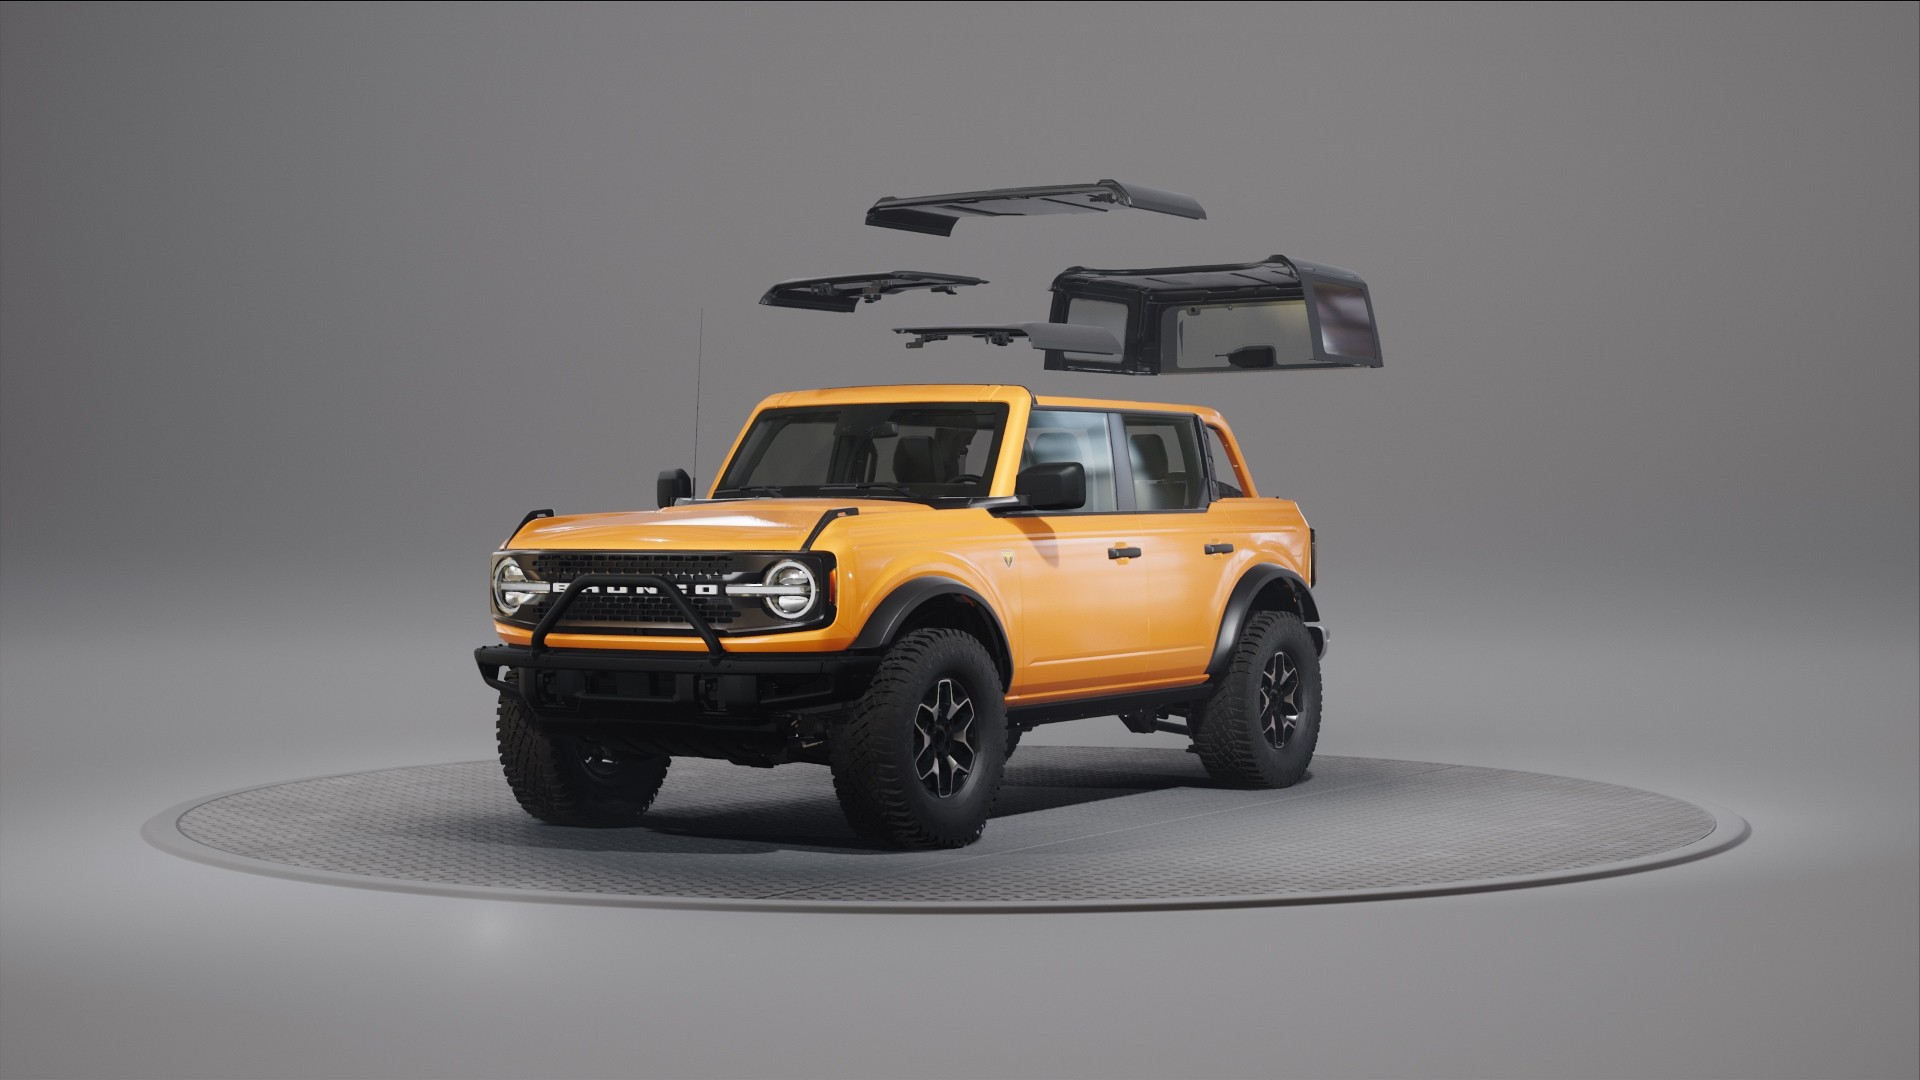 2021 Ford Bronco Drops Fenders, Doors, Grille to Show Customization